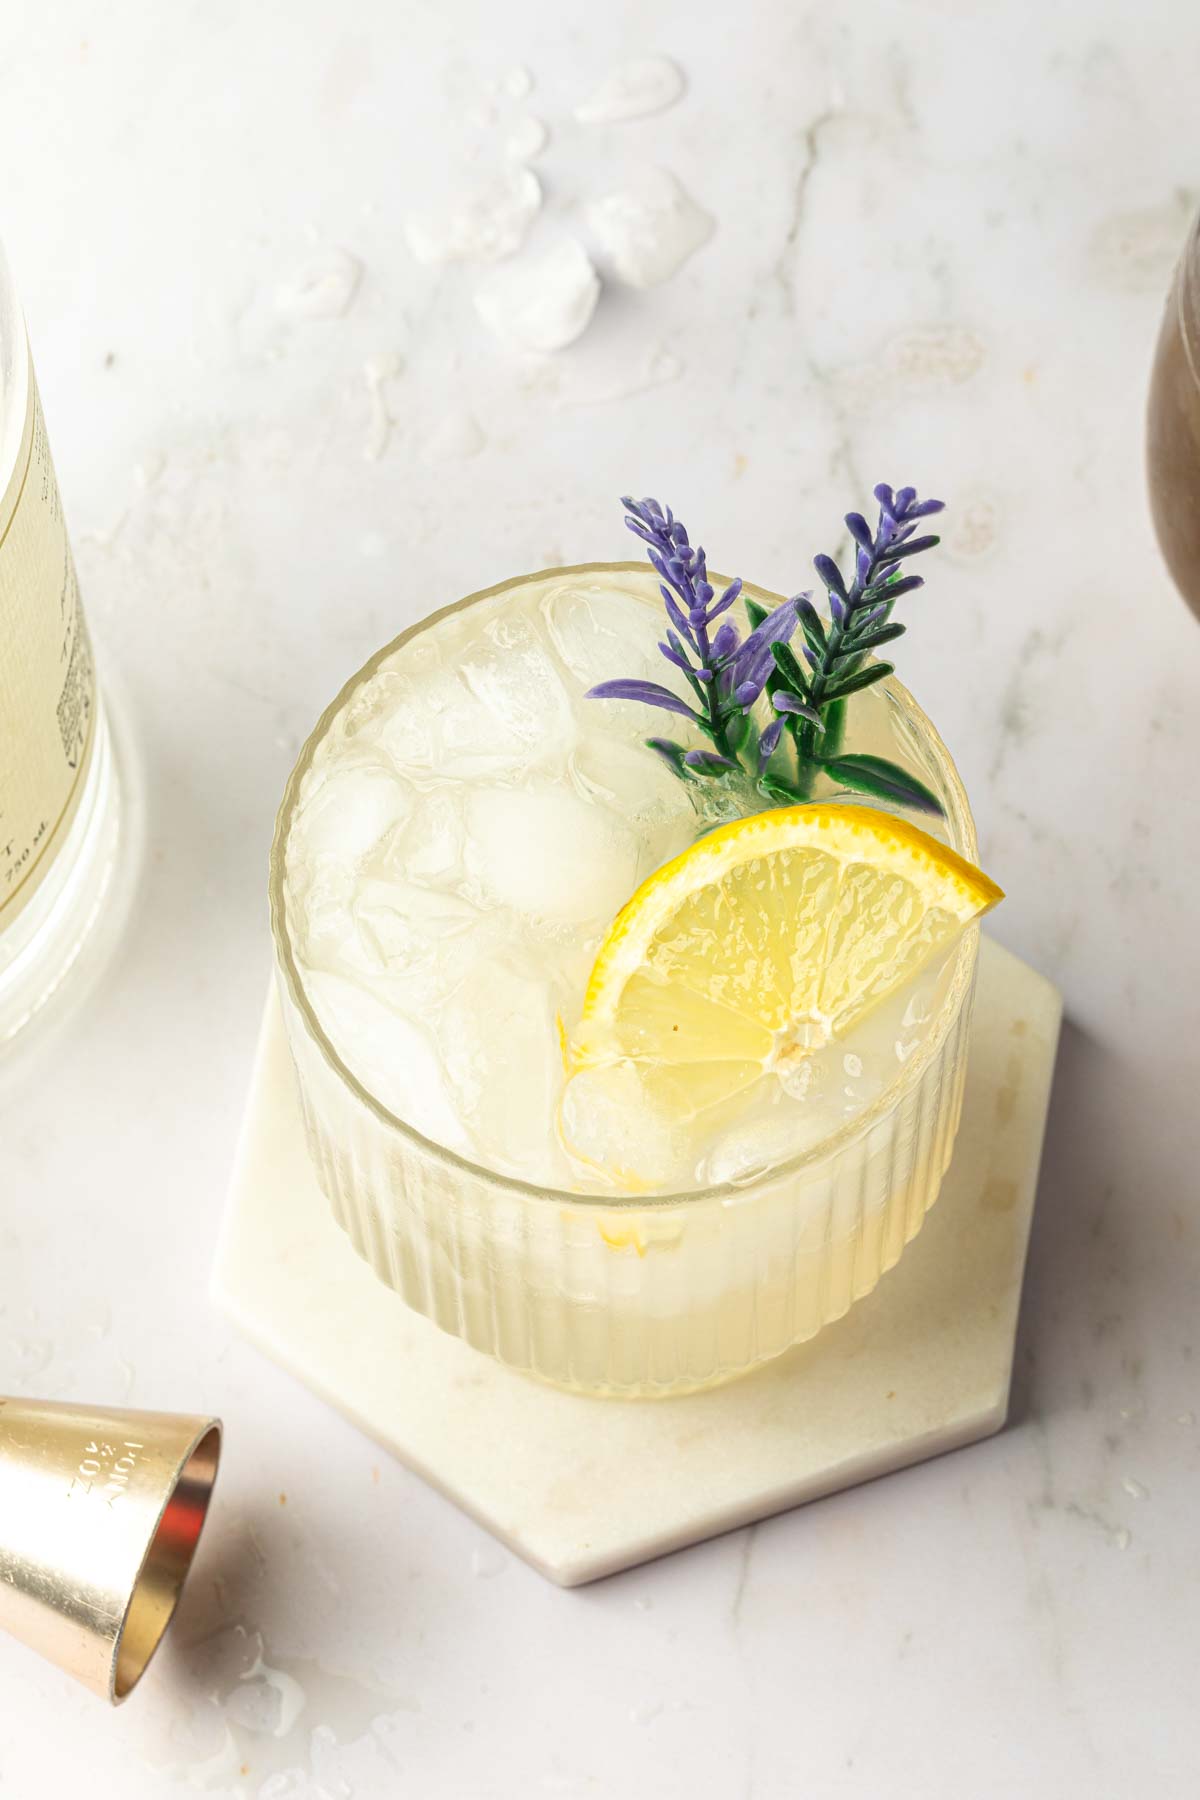 A lavender lemonade gin cocktail garnished with lavender flowers and a lemon wedge.